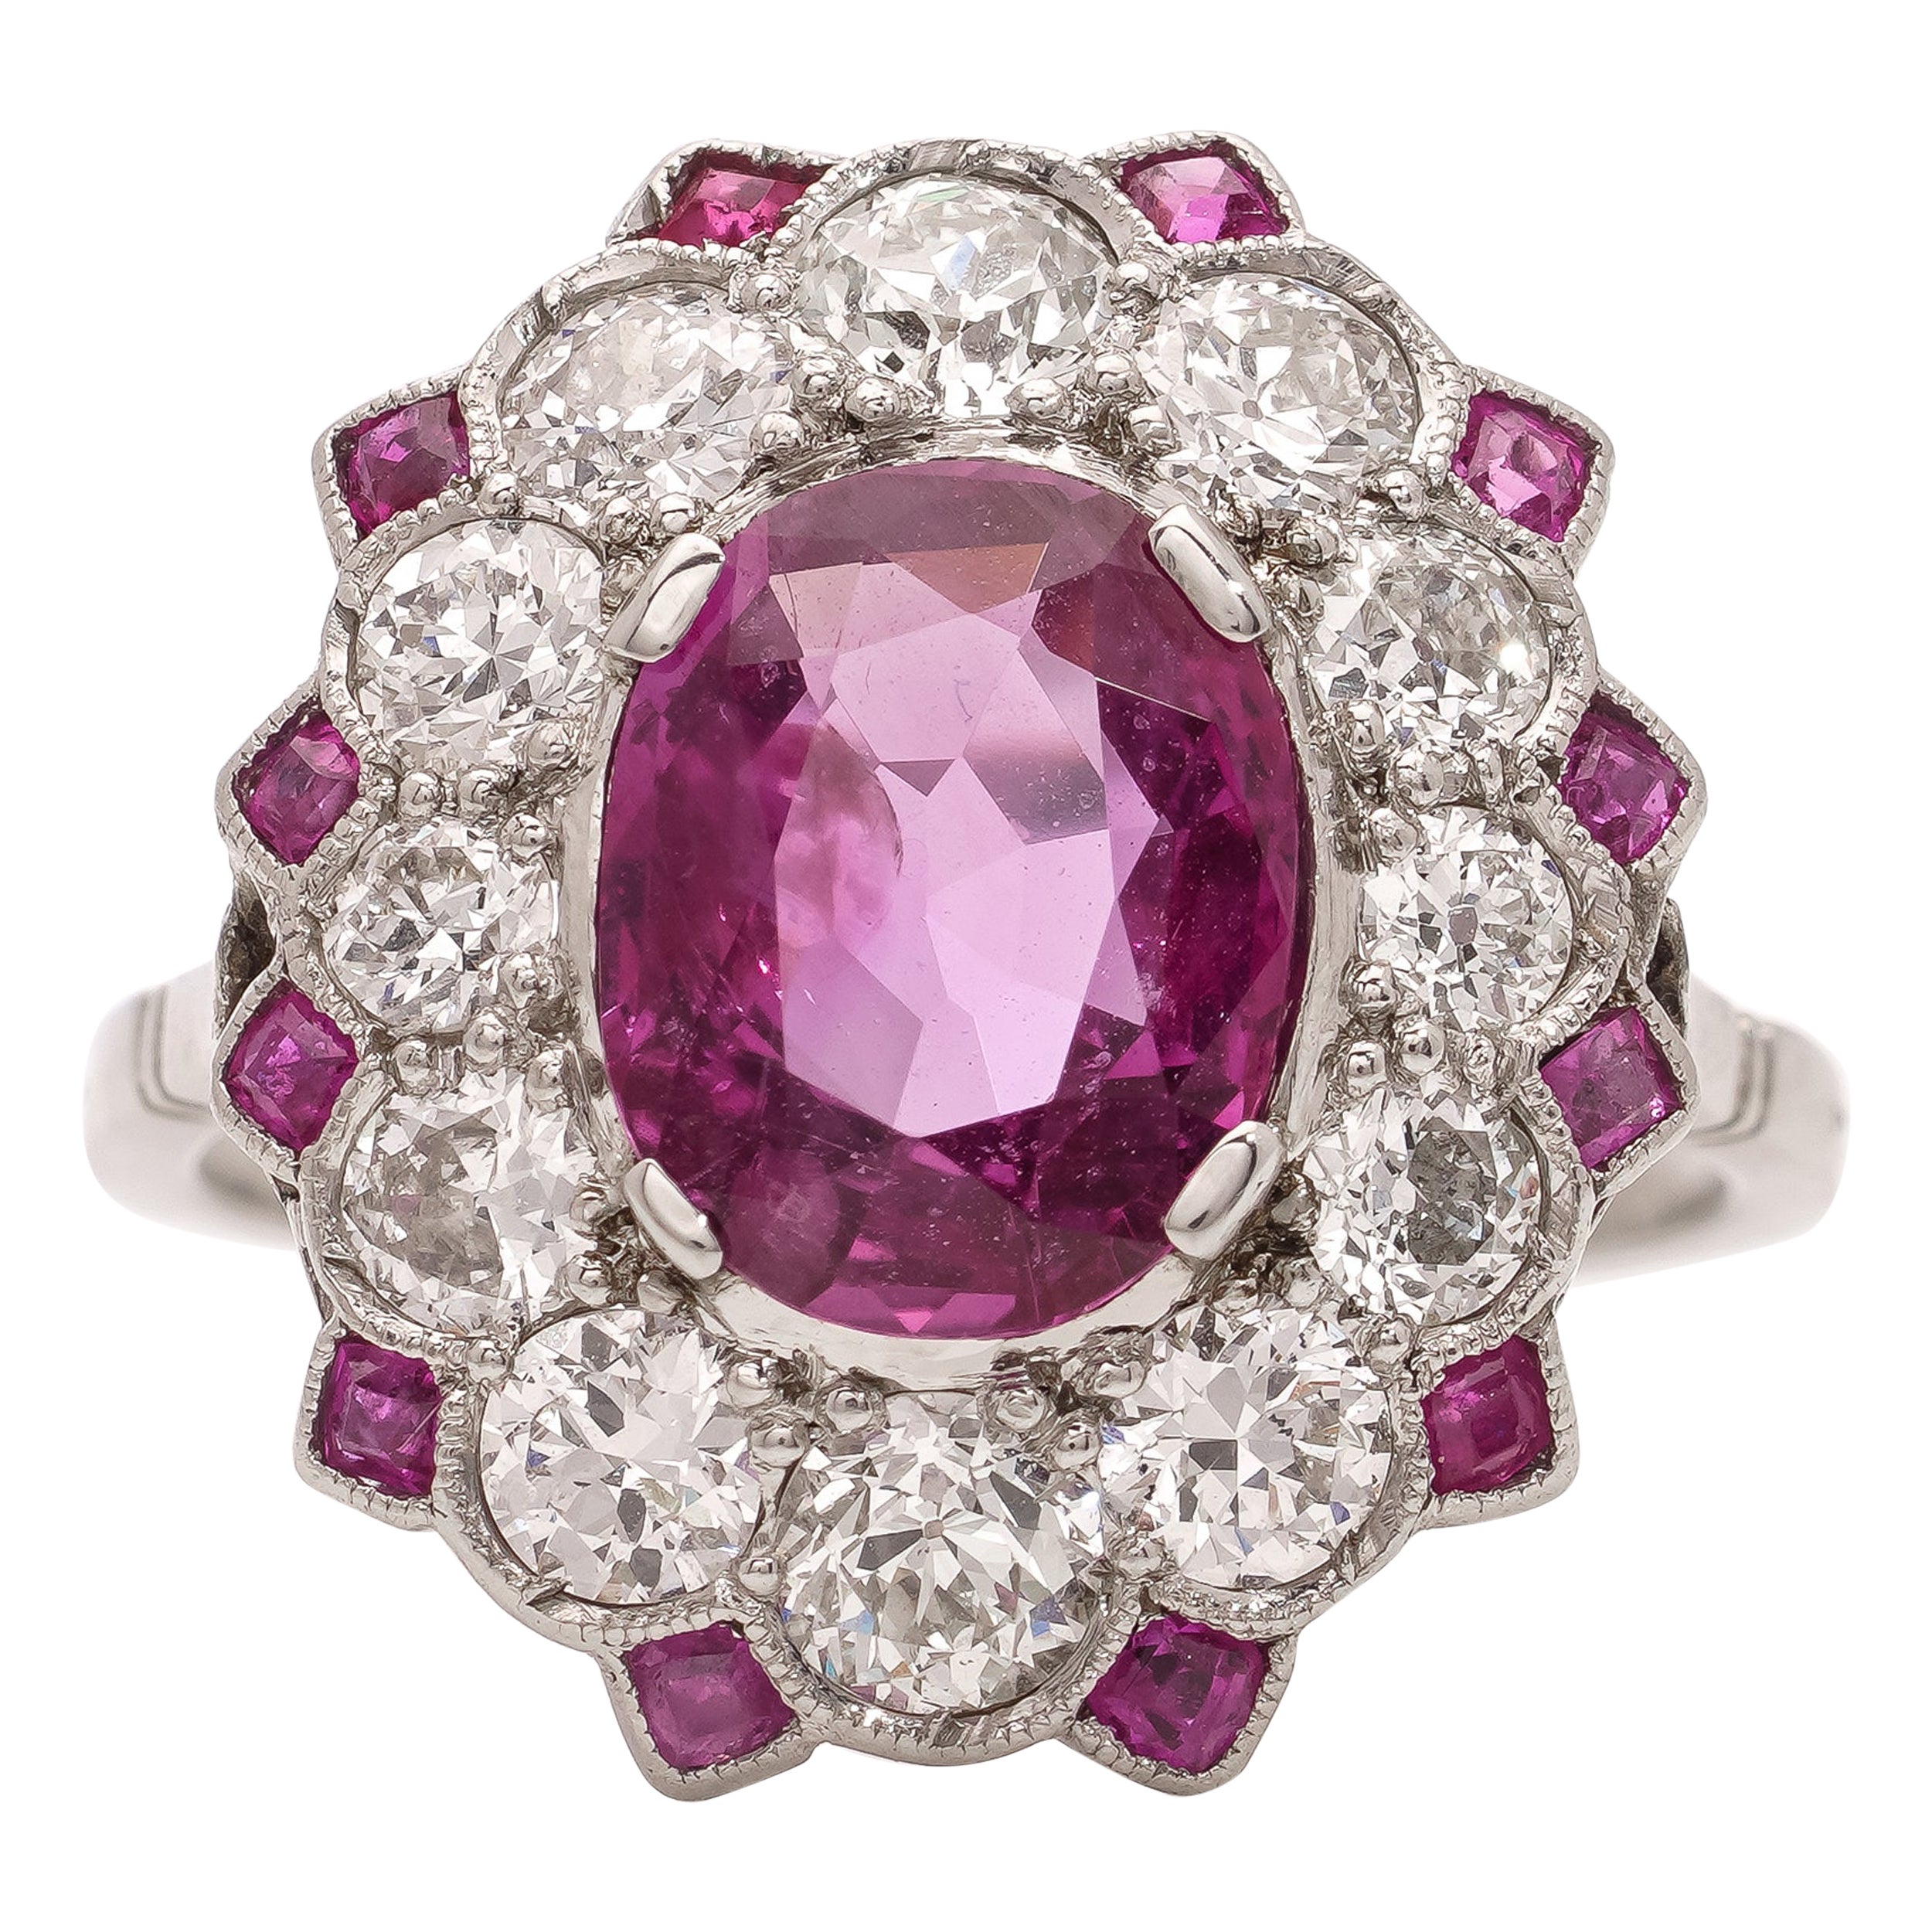 Platinum oval-shaped 2.25 cts. Natural Burma ruby cluster ring 